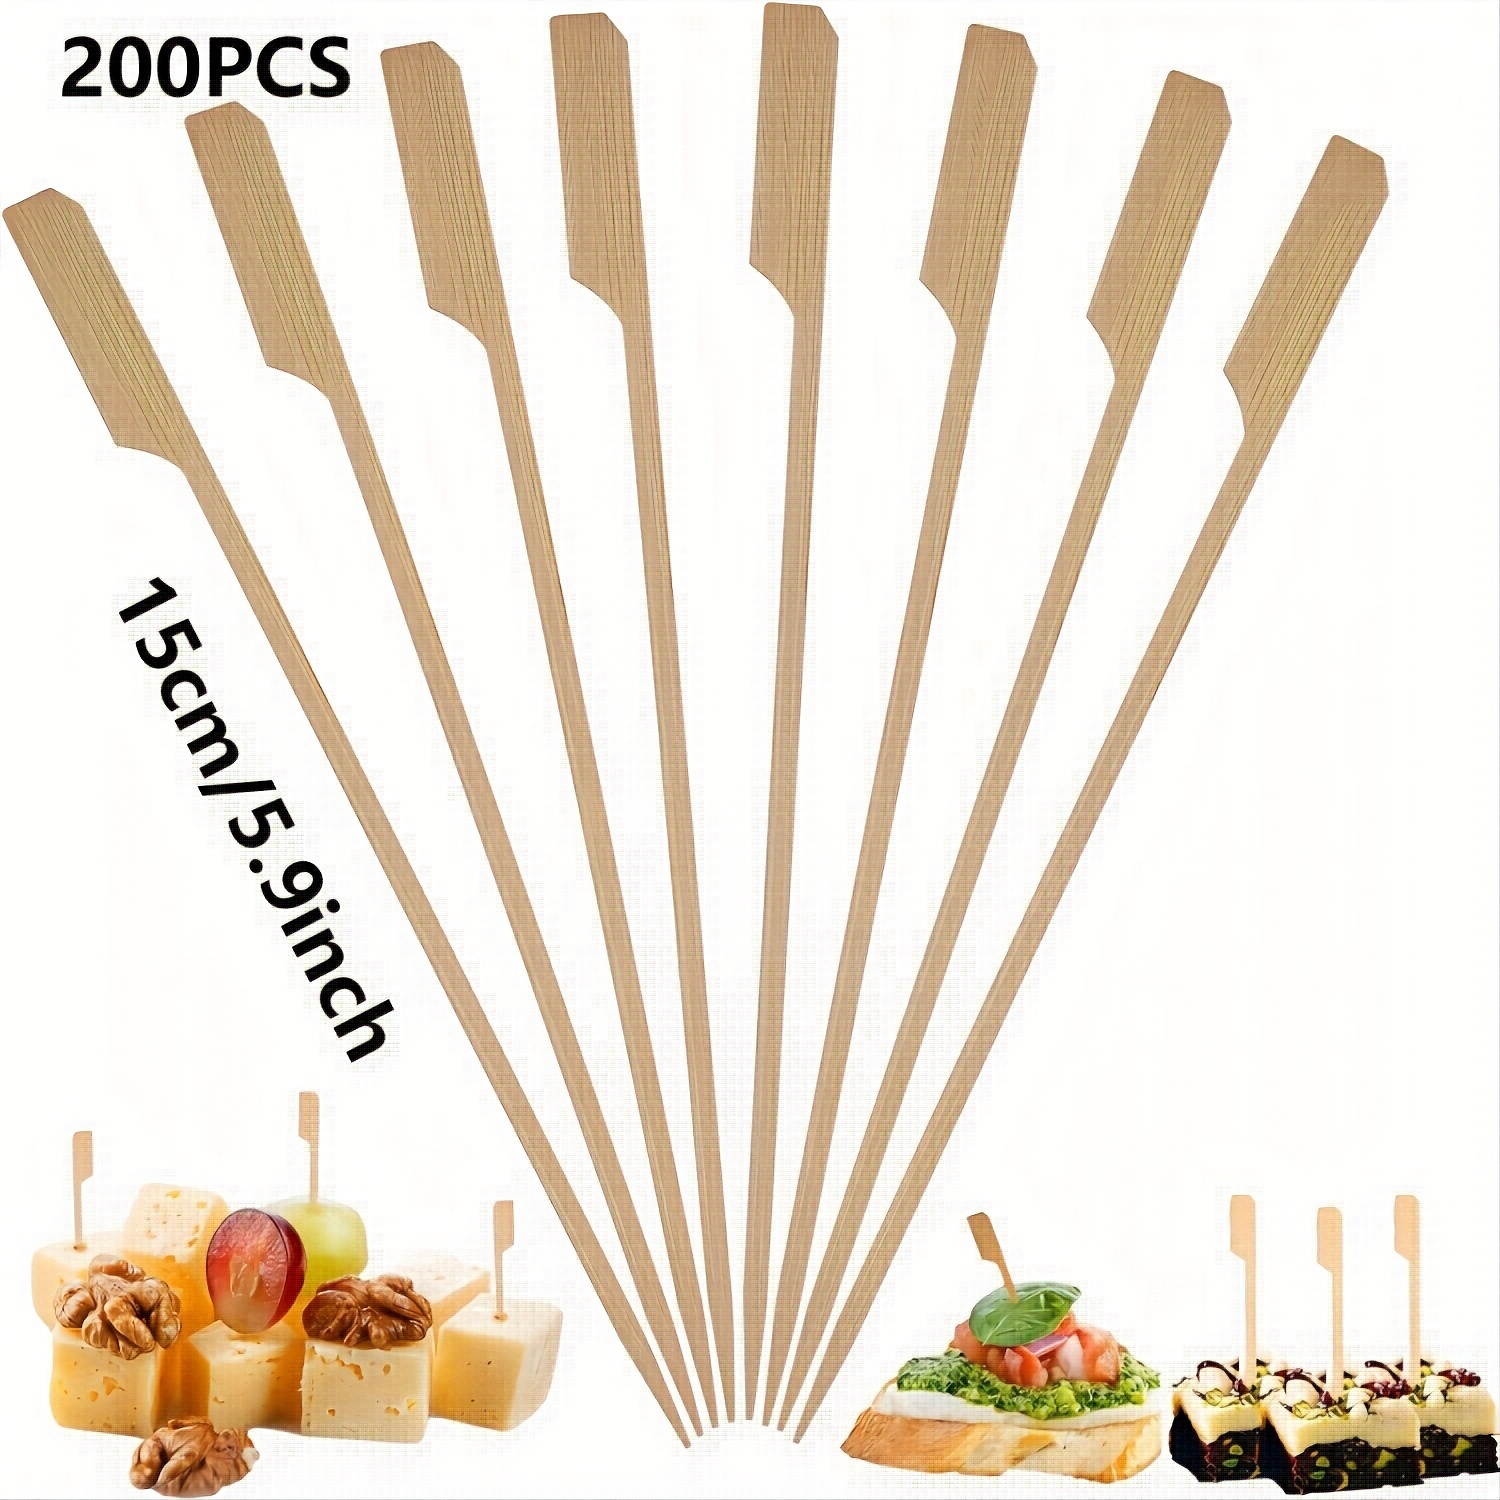 50PCS /12 inch Bamboo Skewers for Wooden Sticks, BBQ, Appetizer